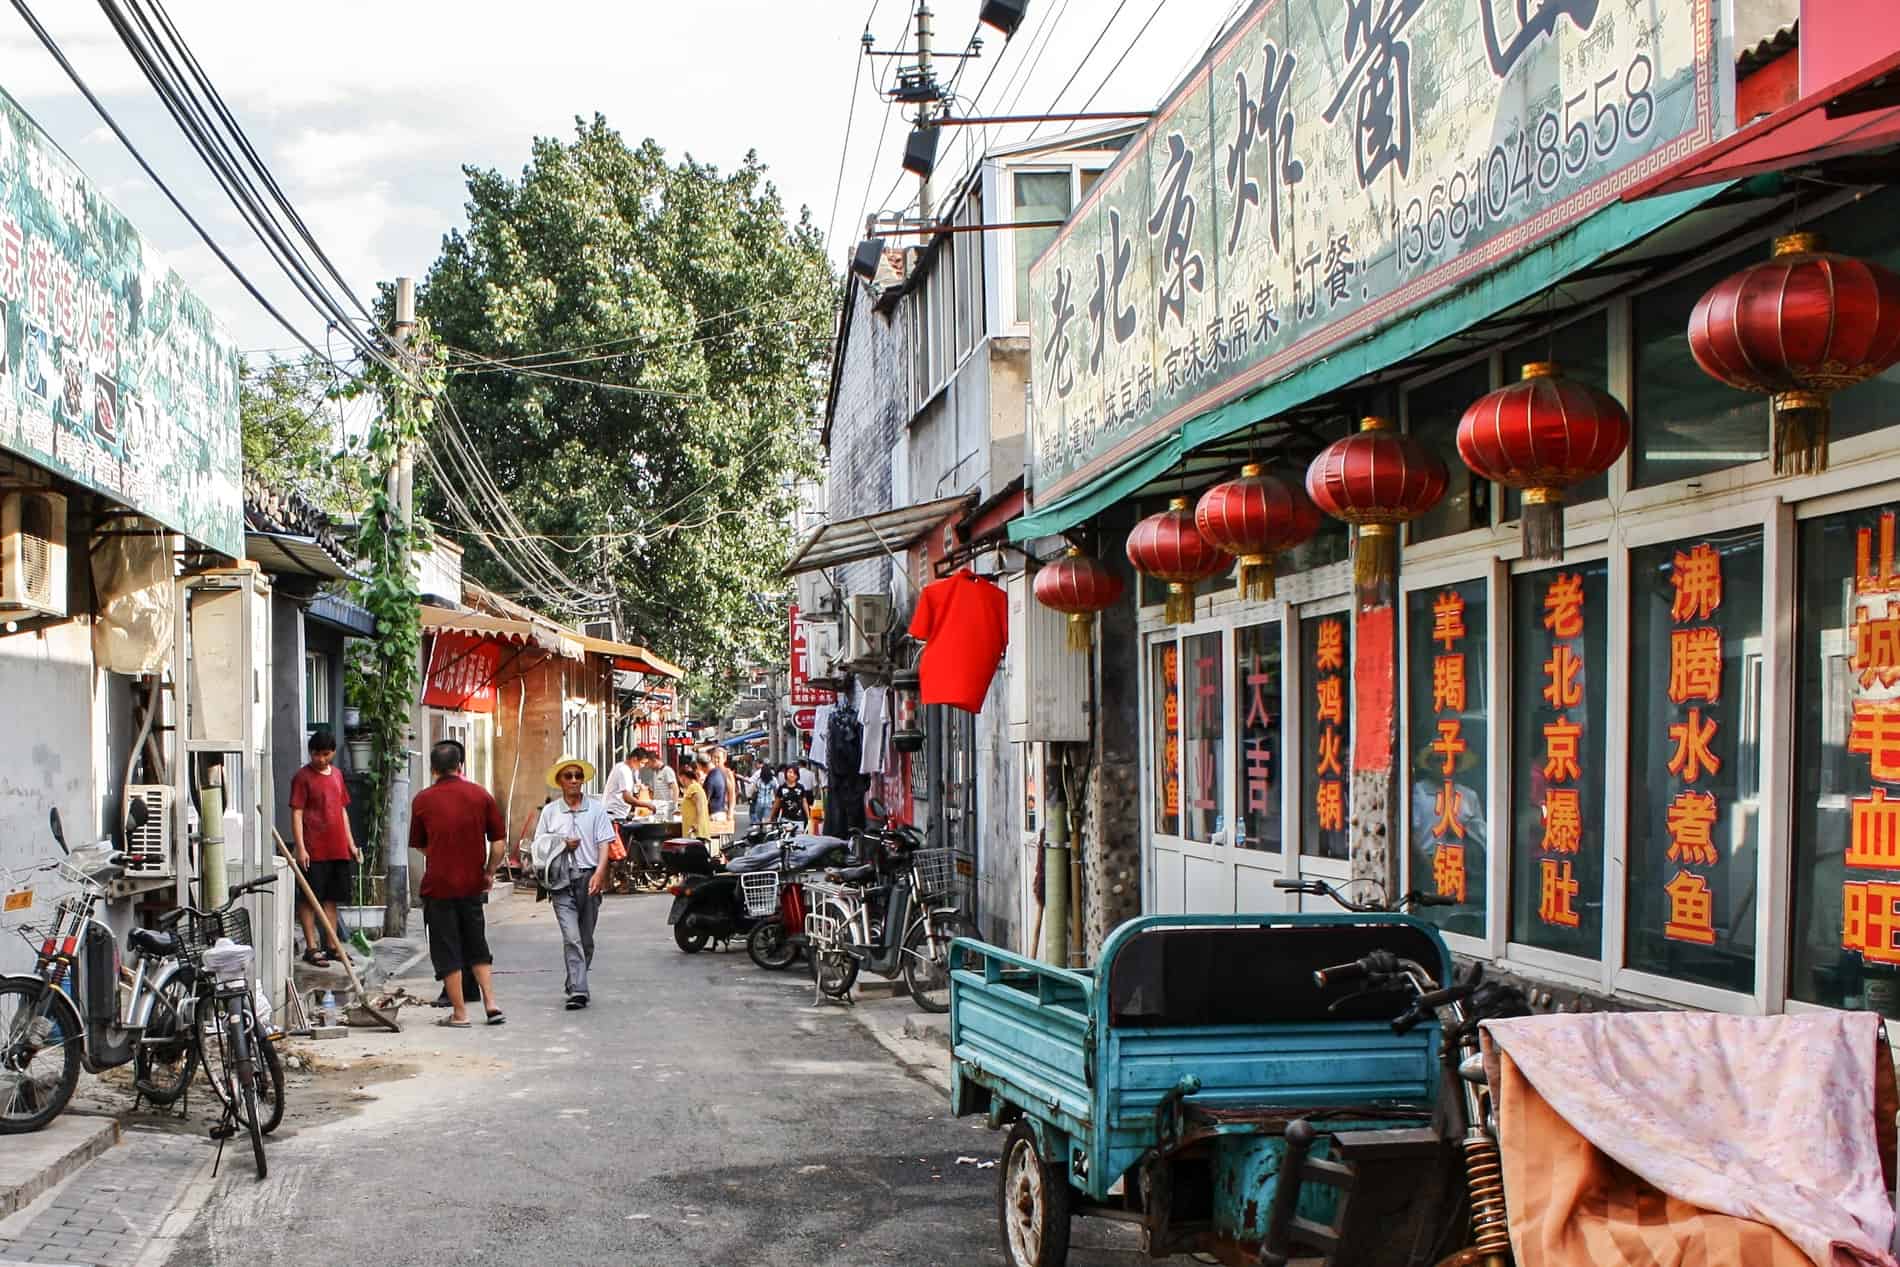 People surrounding street vendors in a Beijing Hutong near a shop with hanging red lamps. 